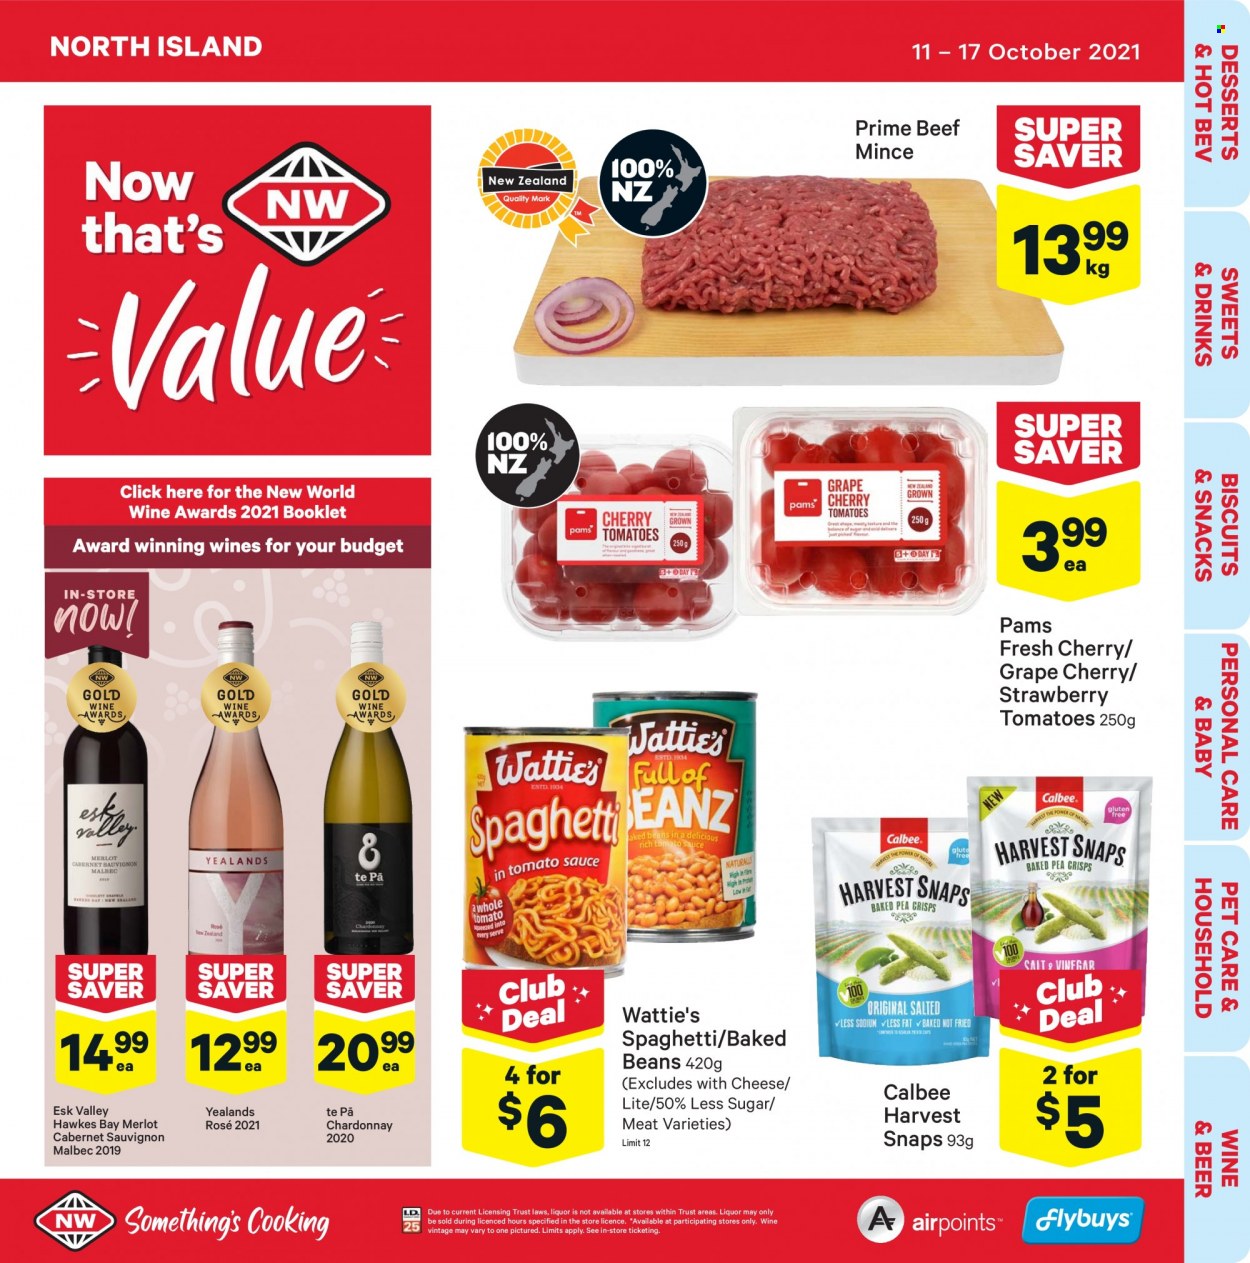 thumbnail - New World mailer - 11.10.2021 - 17.10.2021 - Sales products - beans, tomatoes, cherries, spaghetti, Wattie's, cheese, snack, biscuit, Harvest Snaps, baked beans, Cabernet Sauvignon, red wine, white wine, Chardonnay, wine, Merlot, rosé wine, beer, beef meat, ground beef. Page 1.